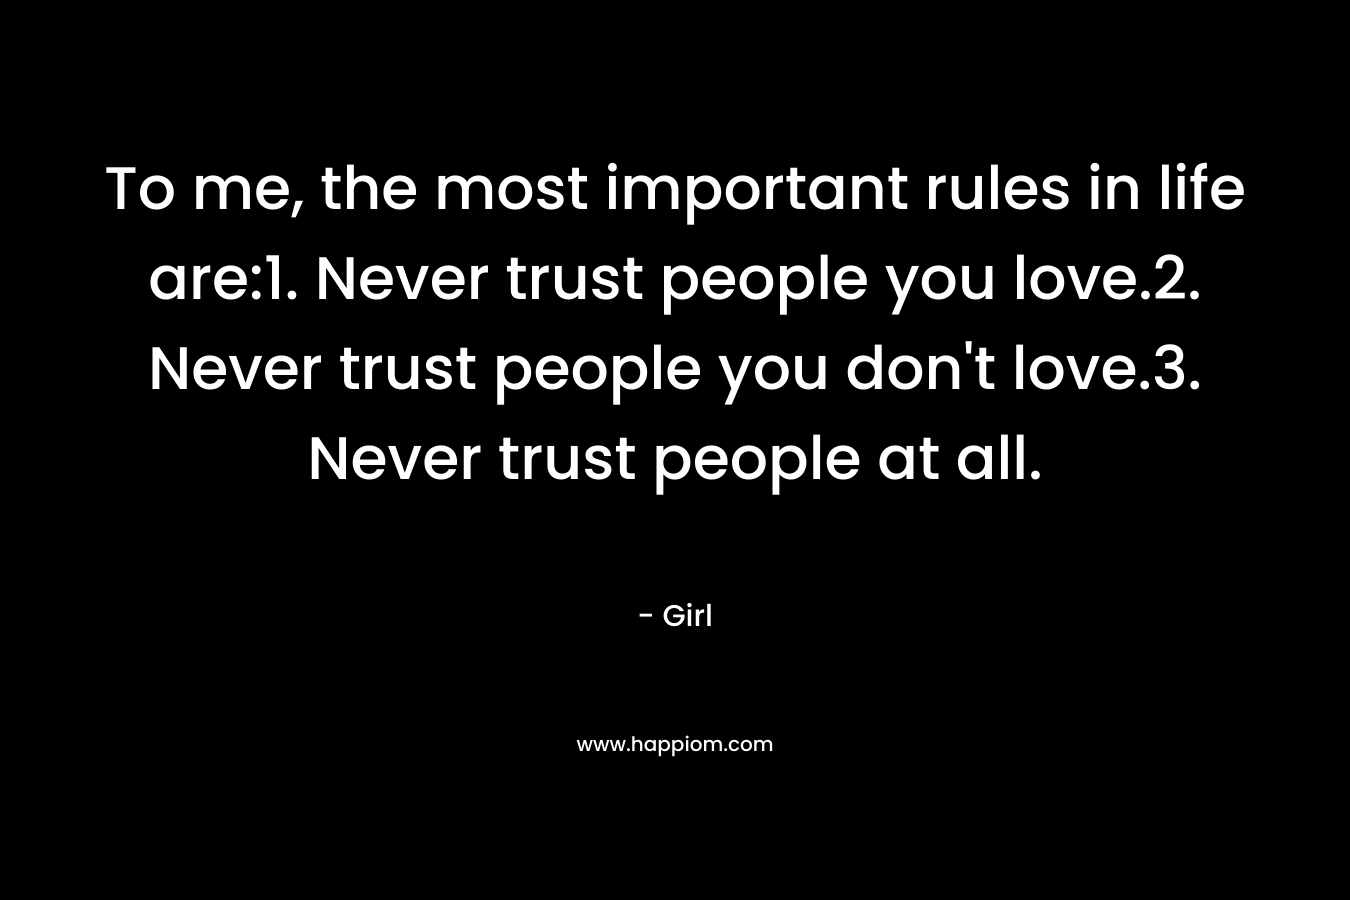 To me, the most important rules in life are:1. Never trust people you love.2. Never trust people you don't love.3. Never trust people at all.